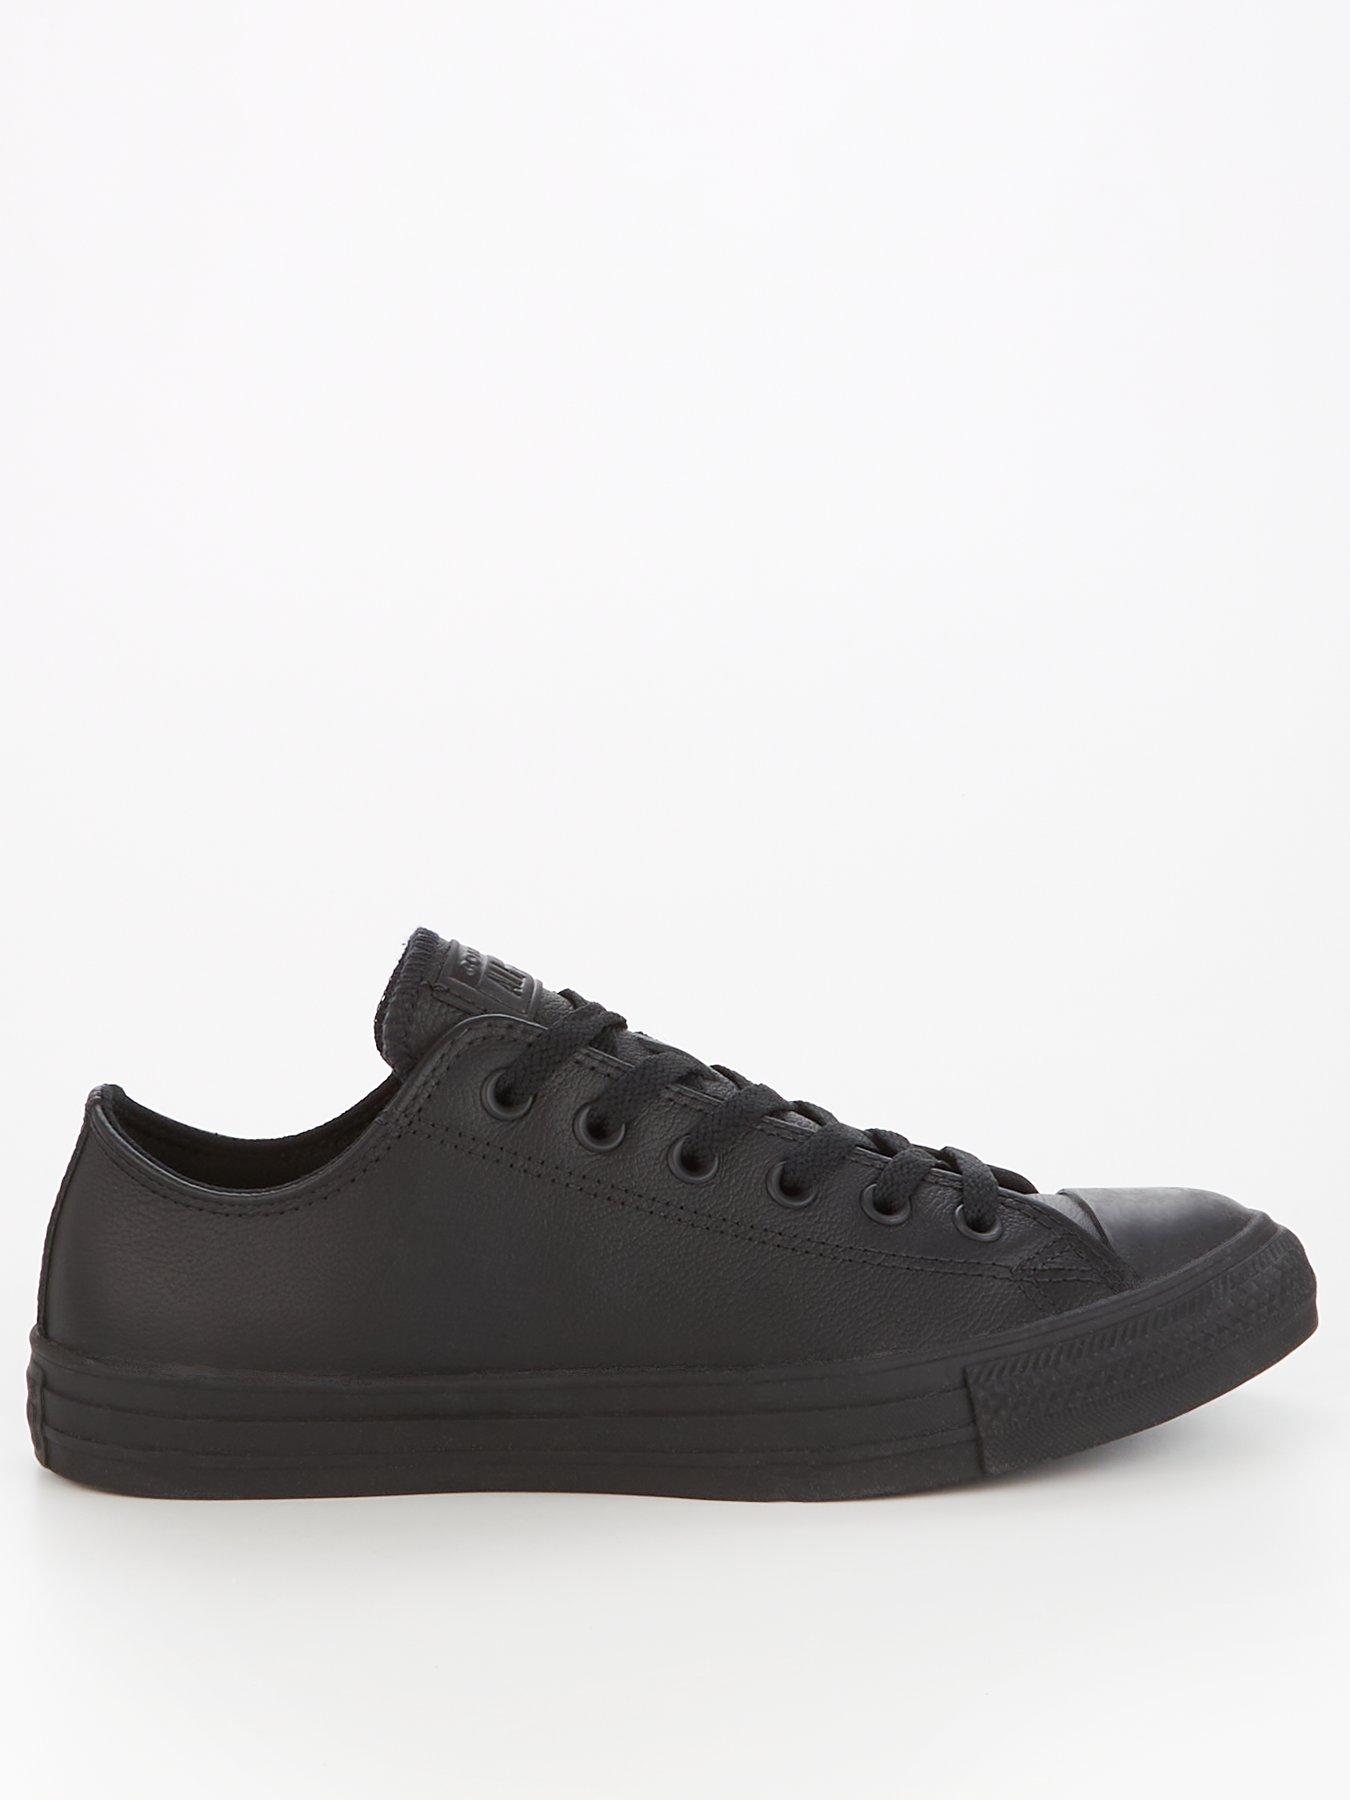 converse chuck taylor all star leather ox uk